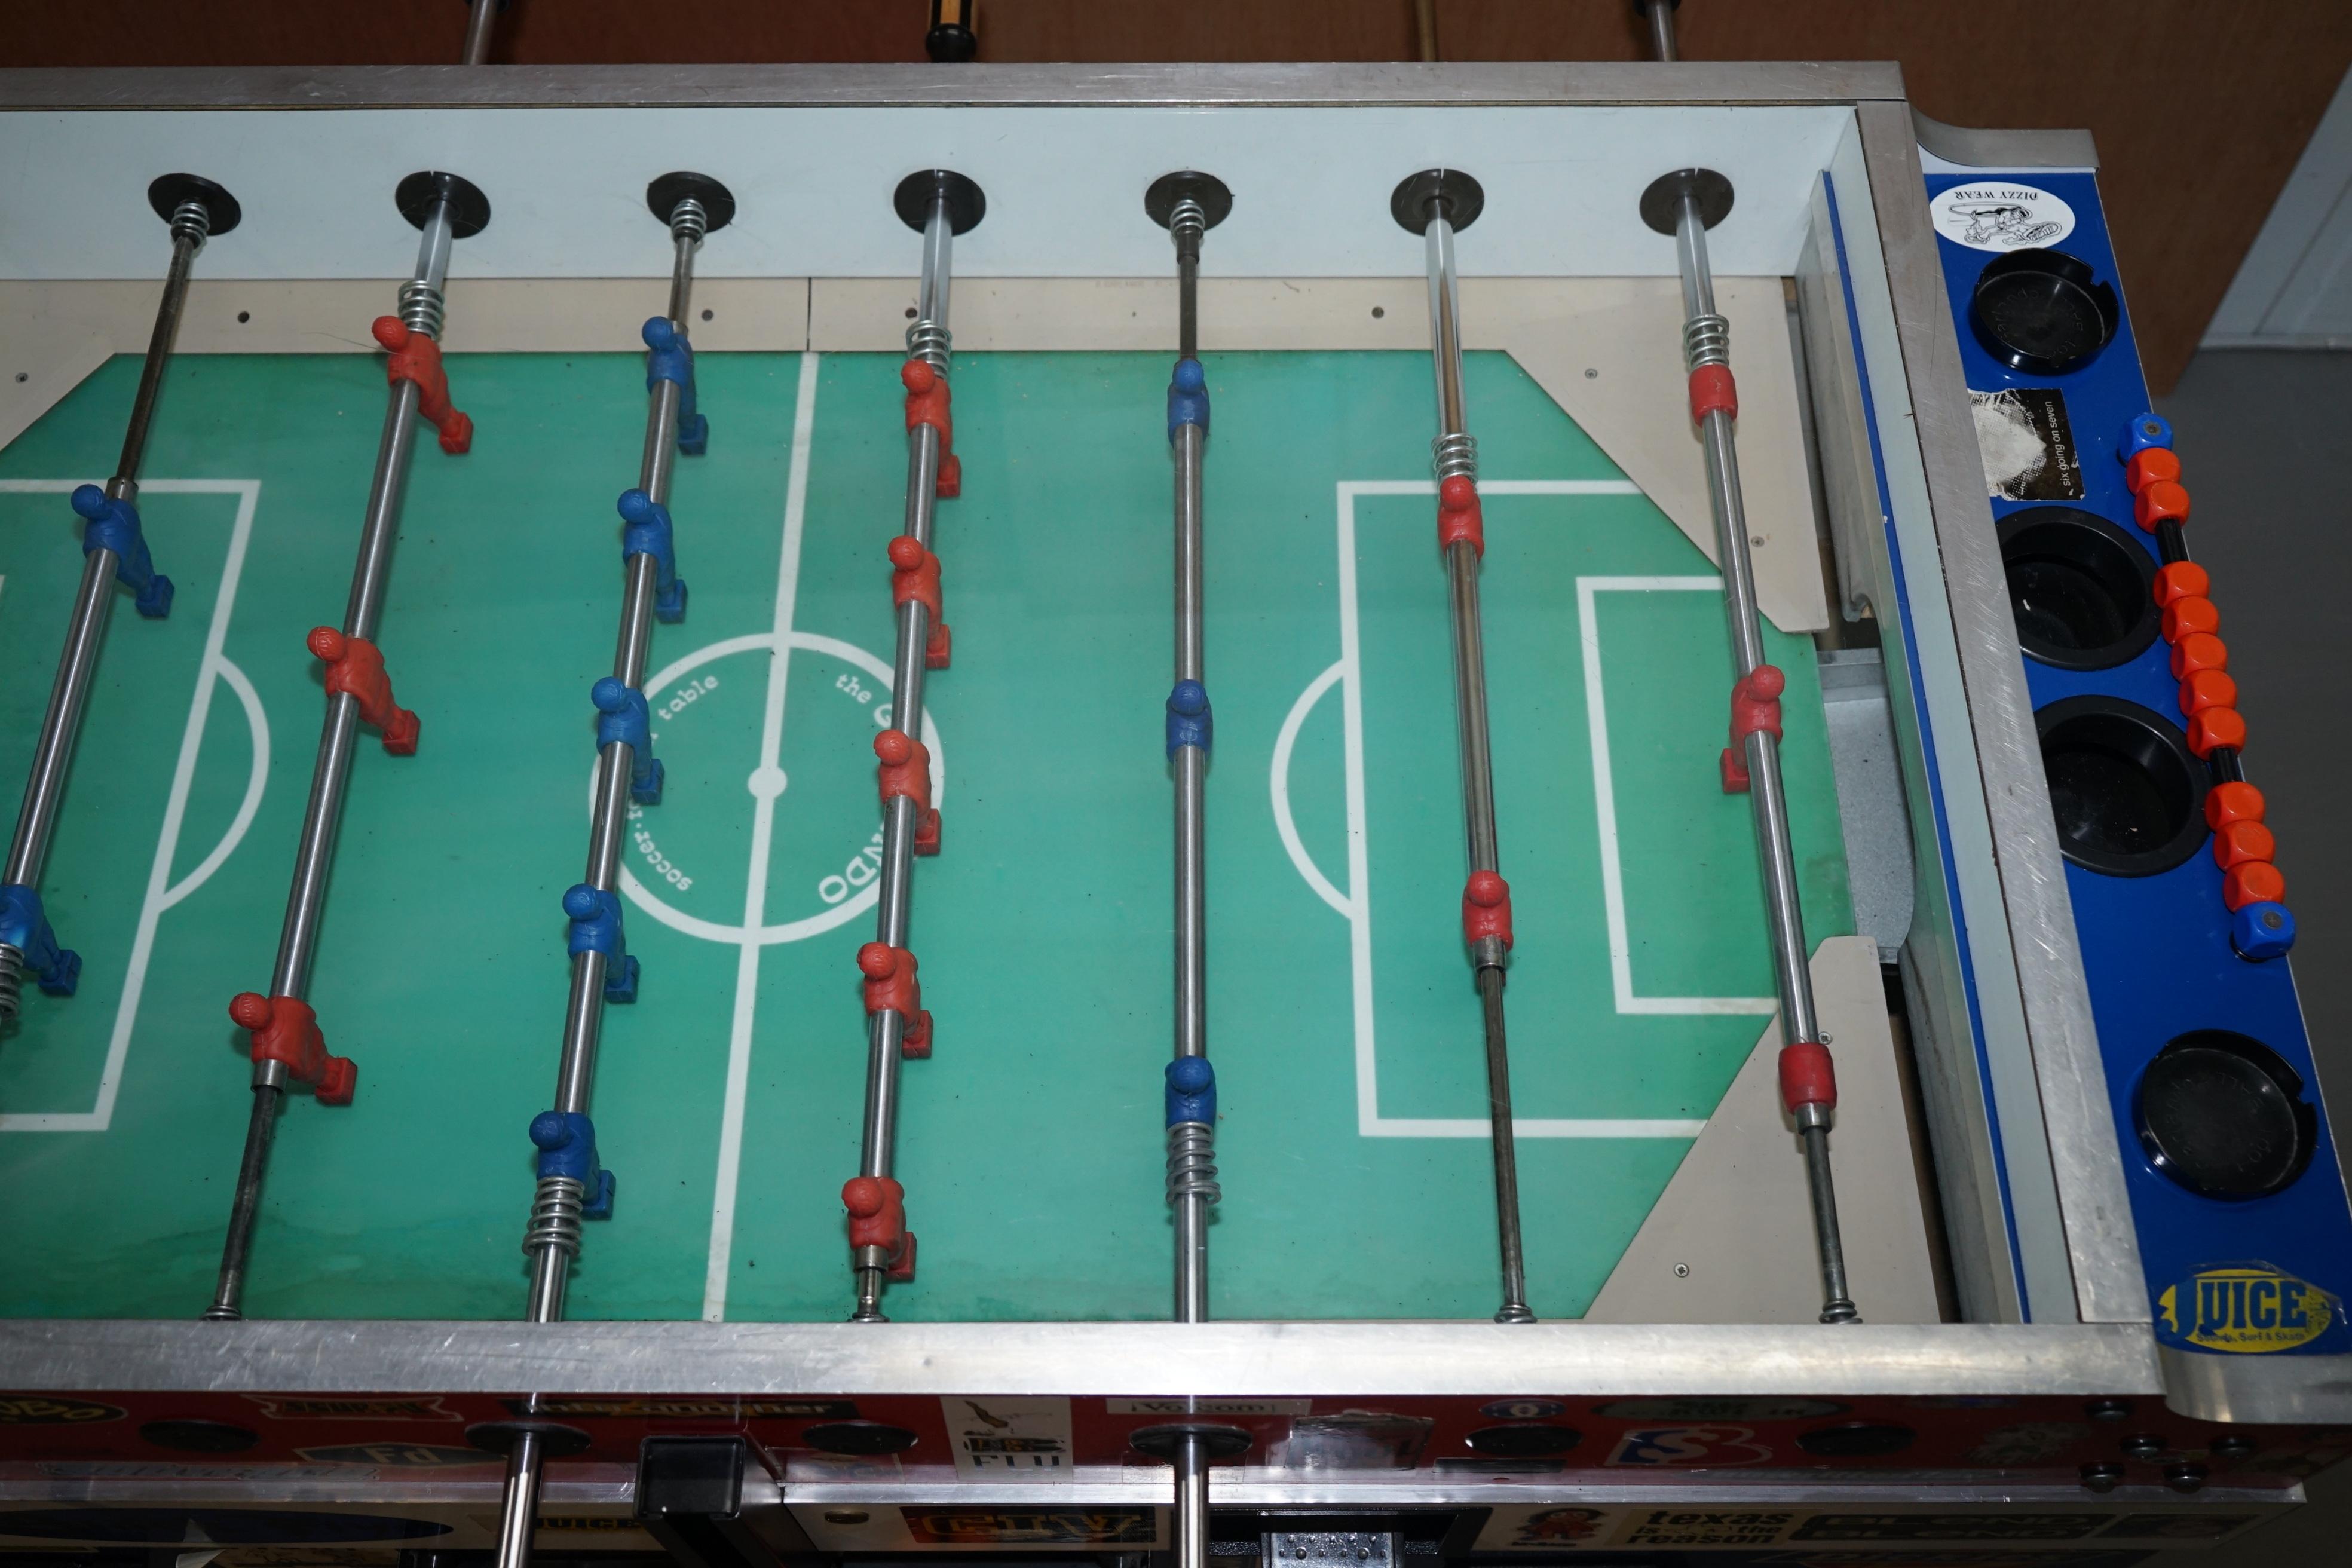 Plastic Vintage Red White & Blue Foosball Table Football Covered in Pop Culture Stickers